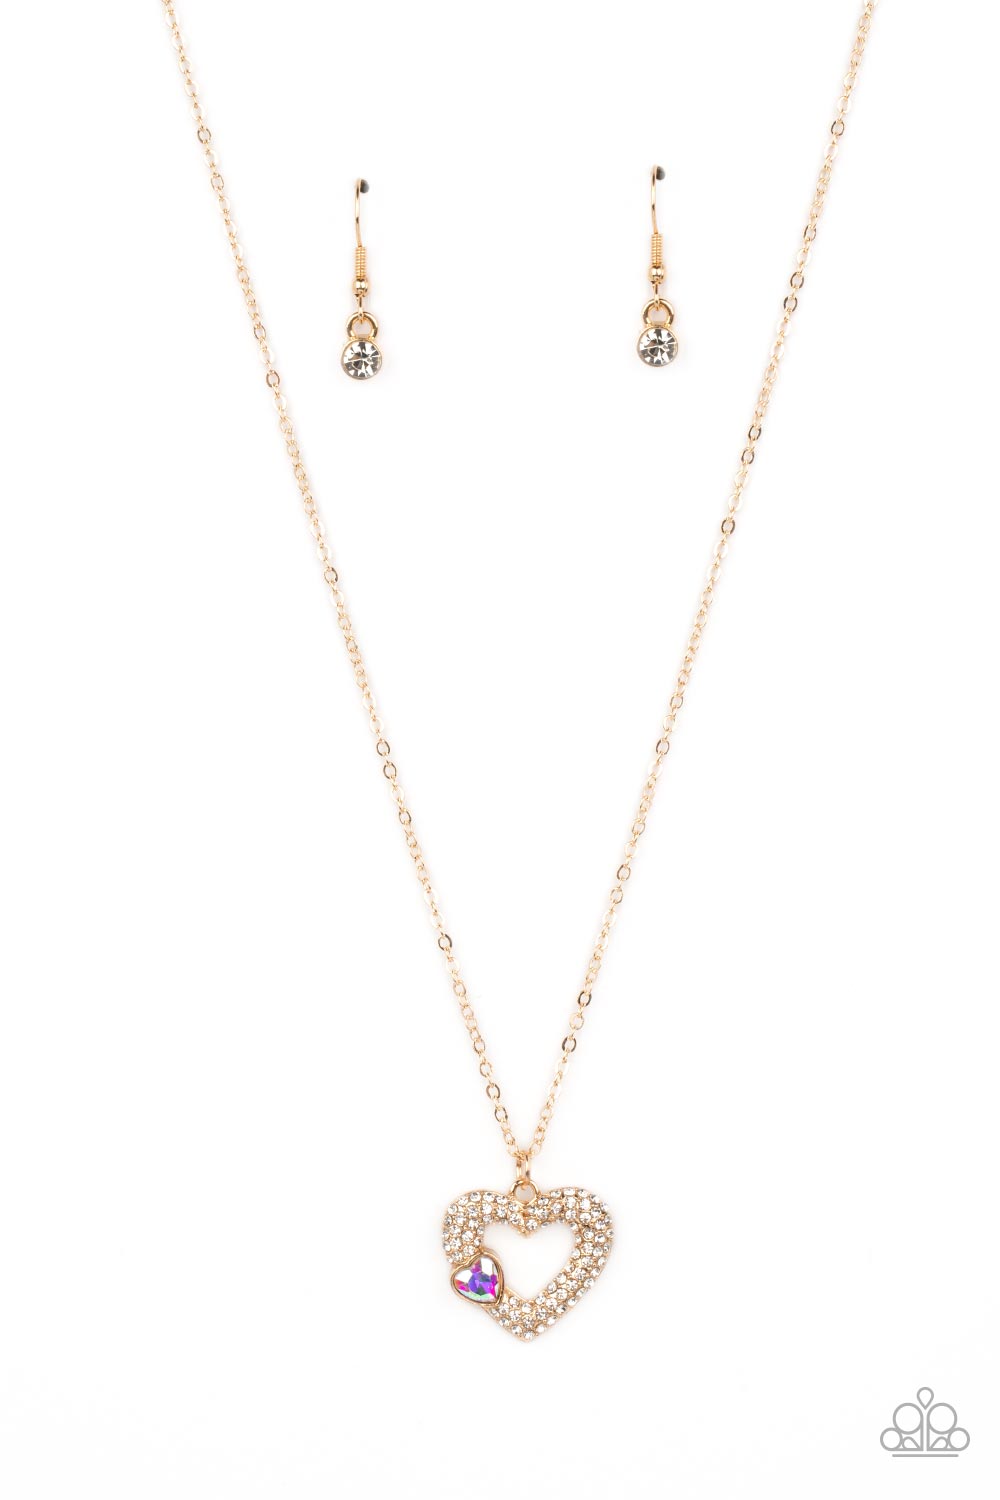 Paparazzi Accessories Bedazzled Bliss - Multi A luxurious airy gold heart lush with glassy white rhinestones swings from a classic gold chain. A faceted heart gem brushed in an iridescent shimmer graces one side of the larger bedazzled heart for a romanti